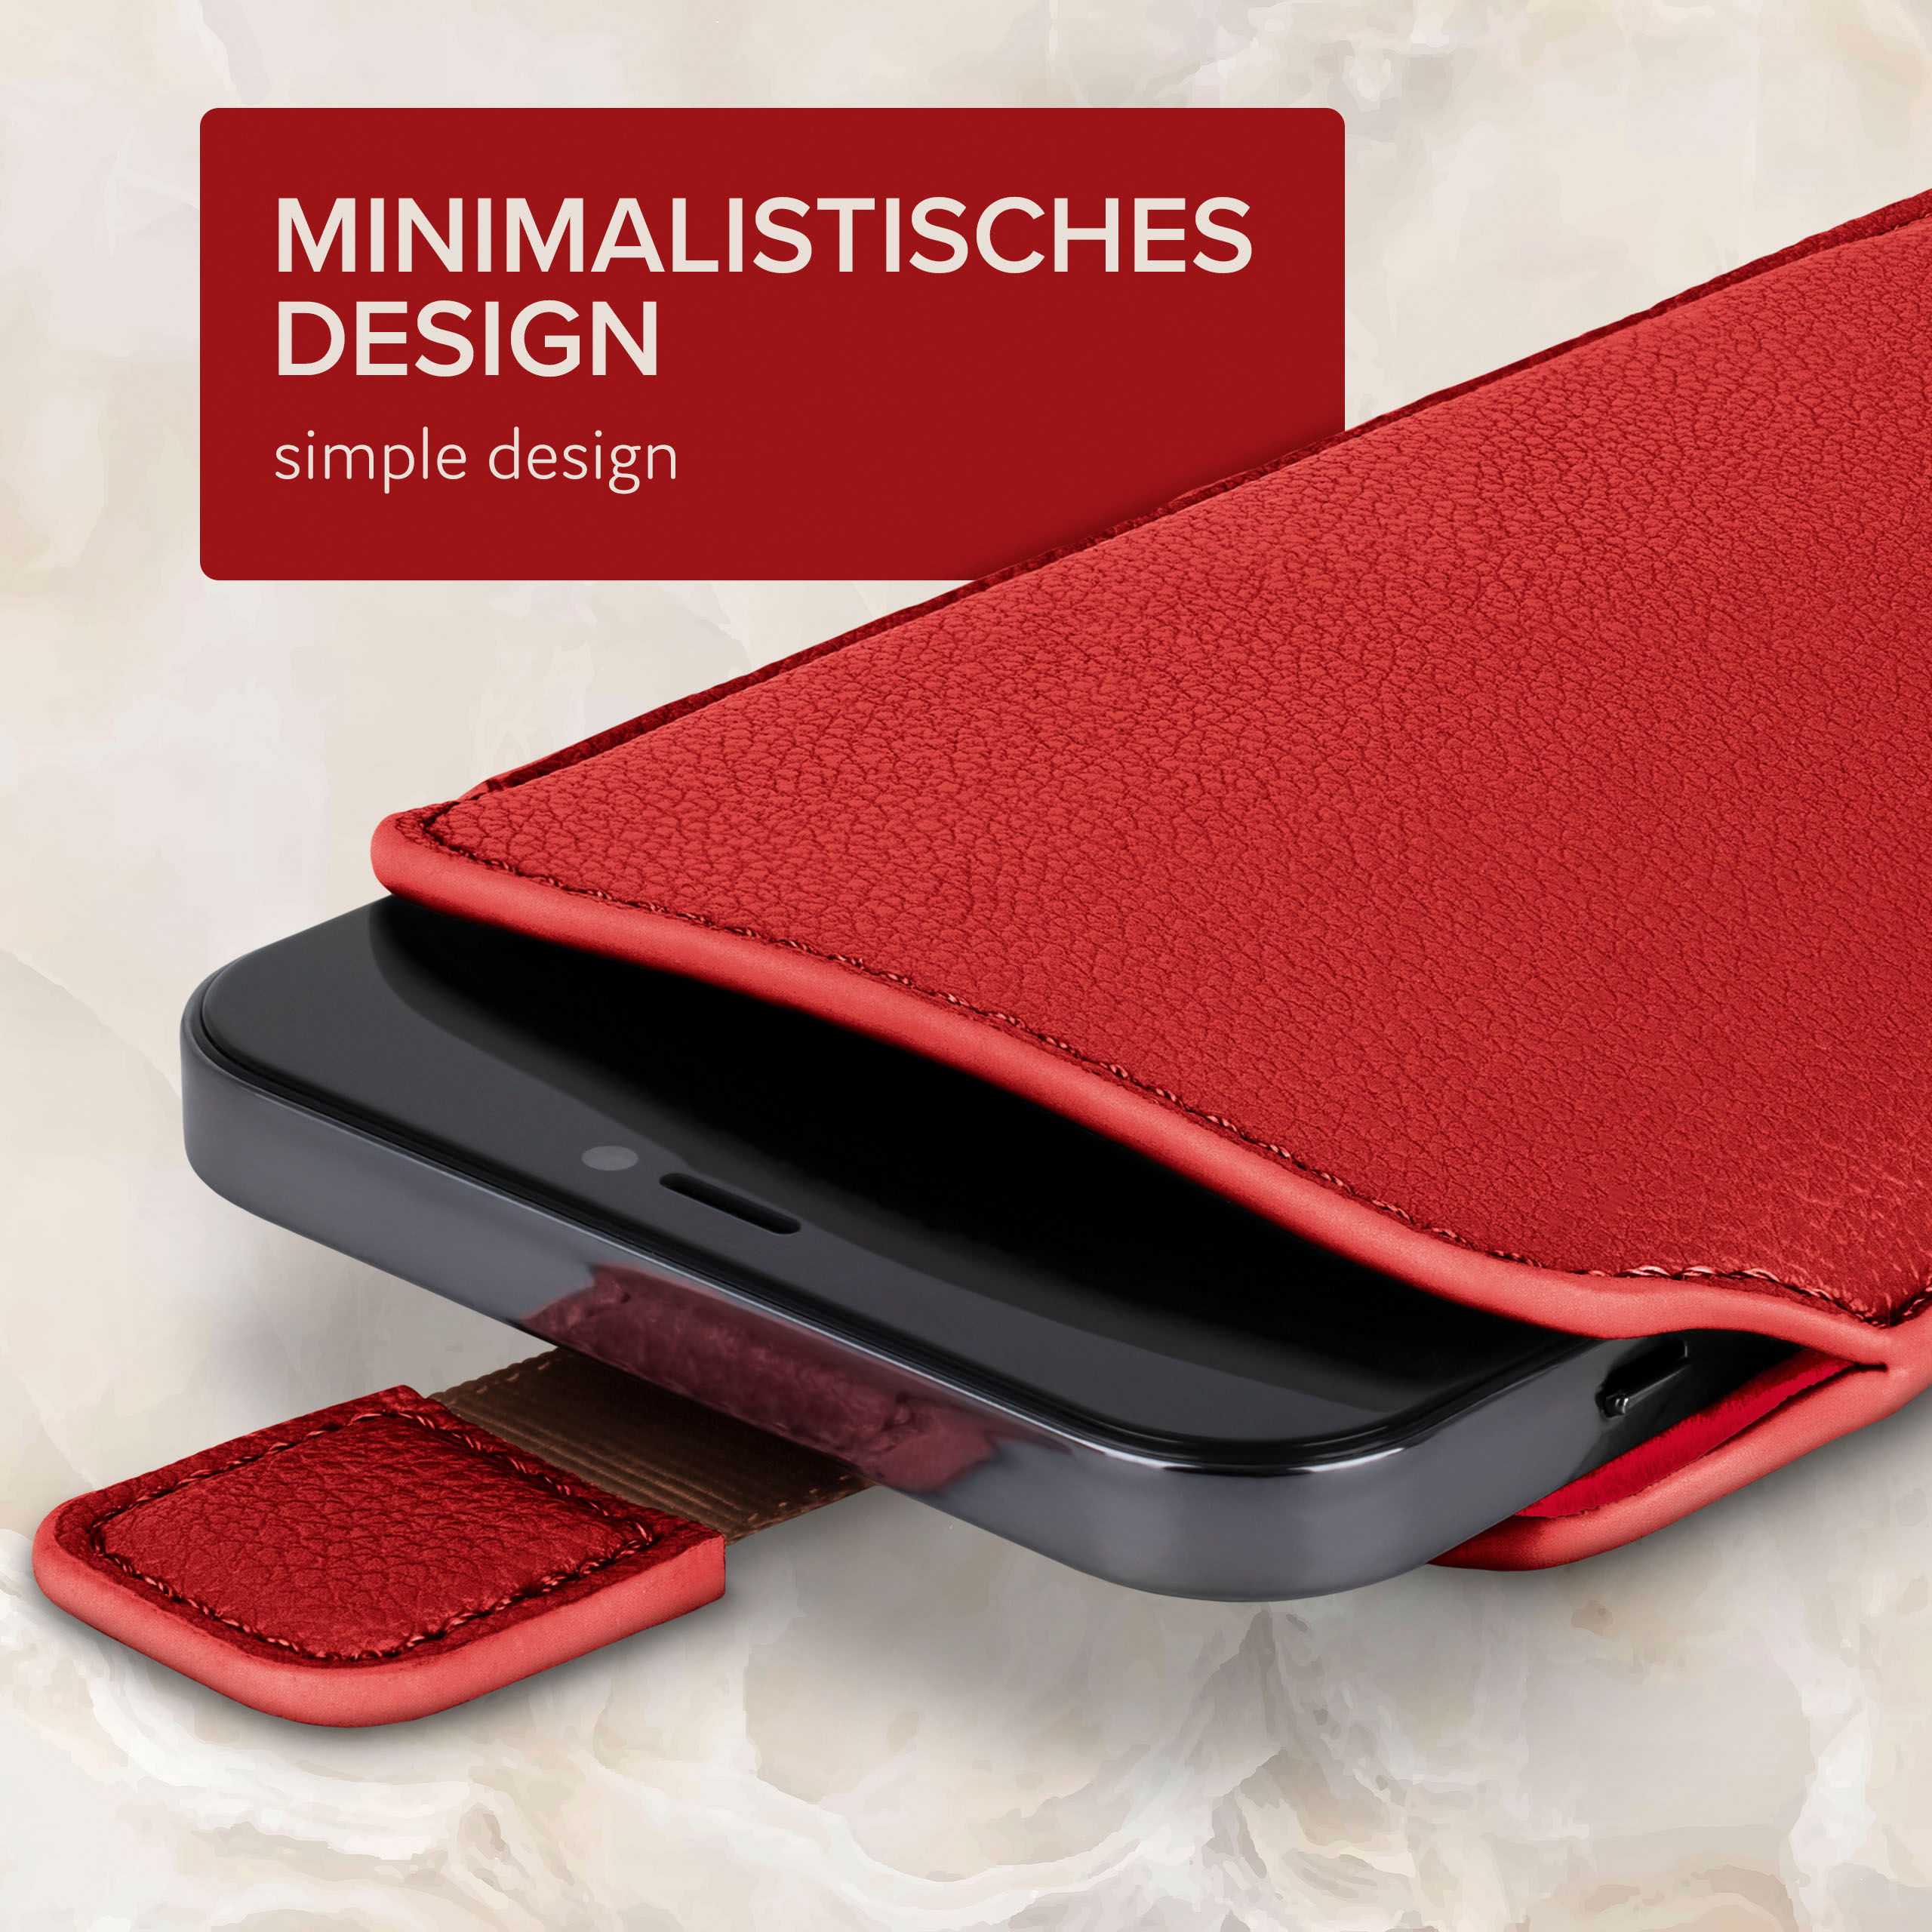 Full Cover, ONEFLOW Z5 Einsteckhülle Compact, mit Sony, Zuglasche, Xperia Dunkelrot